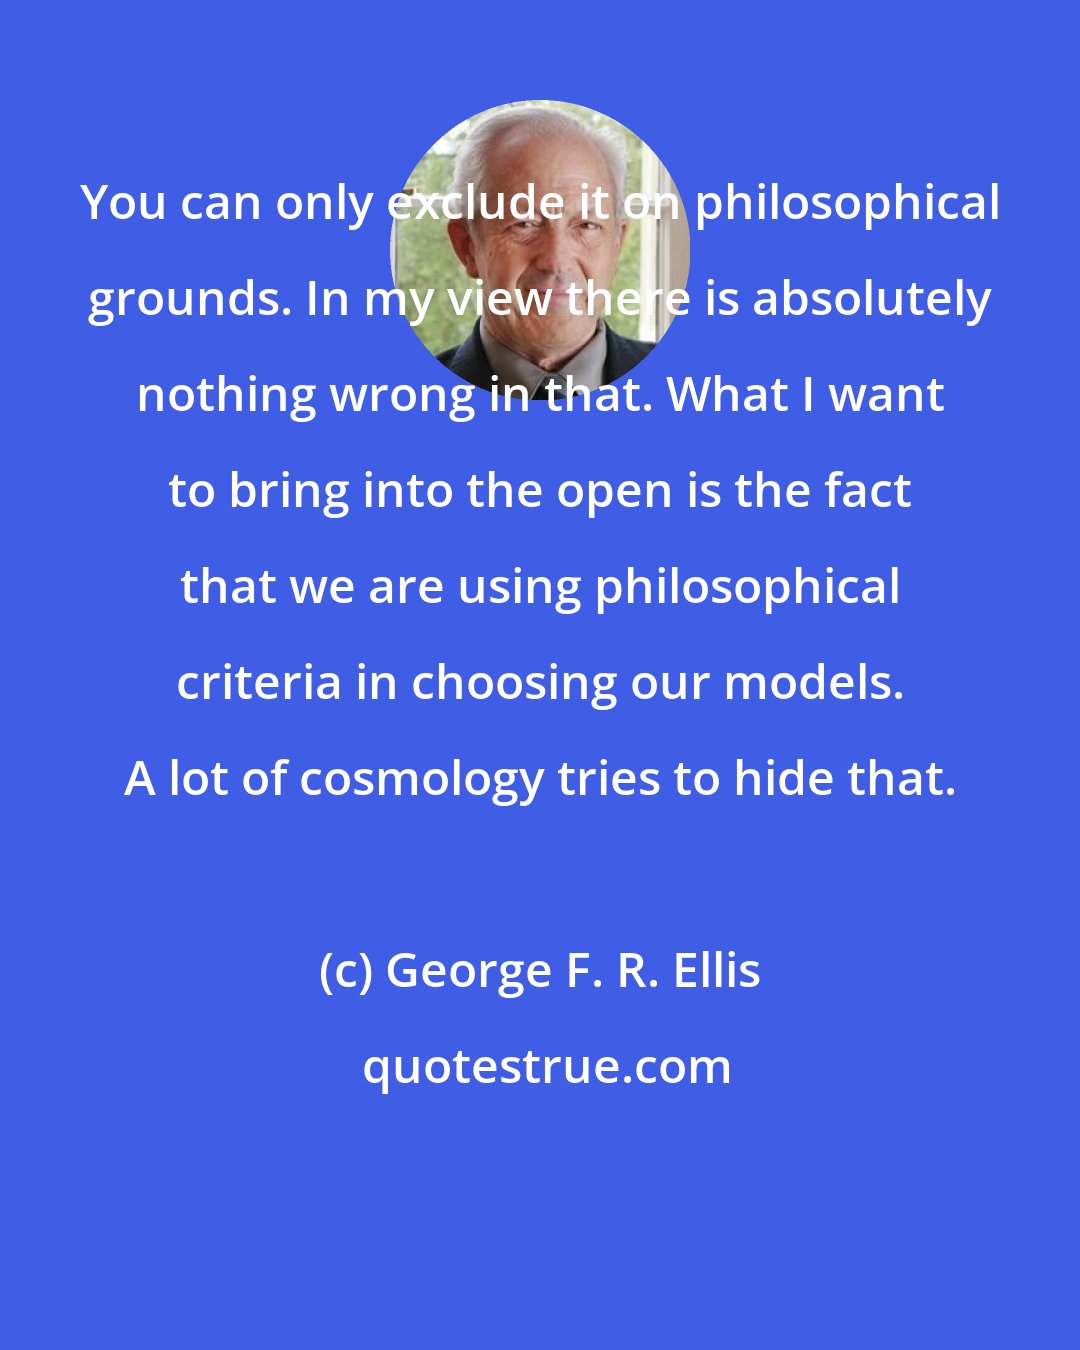 George F. R. Ellis: You can only exclude it on philosophical grounds. In my view there is absolutely nothing wrong in that. What I want to bring into the open is the fact that we are using philosophical criteria in choosing our models. A lot of cosmology tries to hide that.